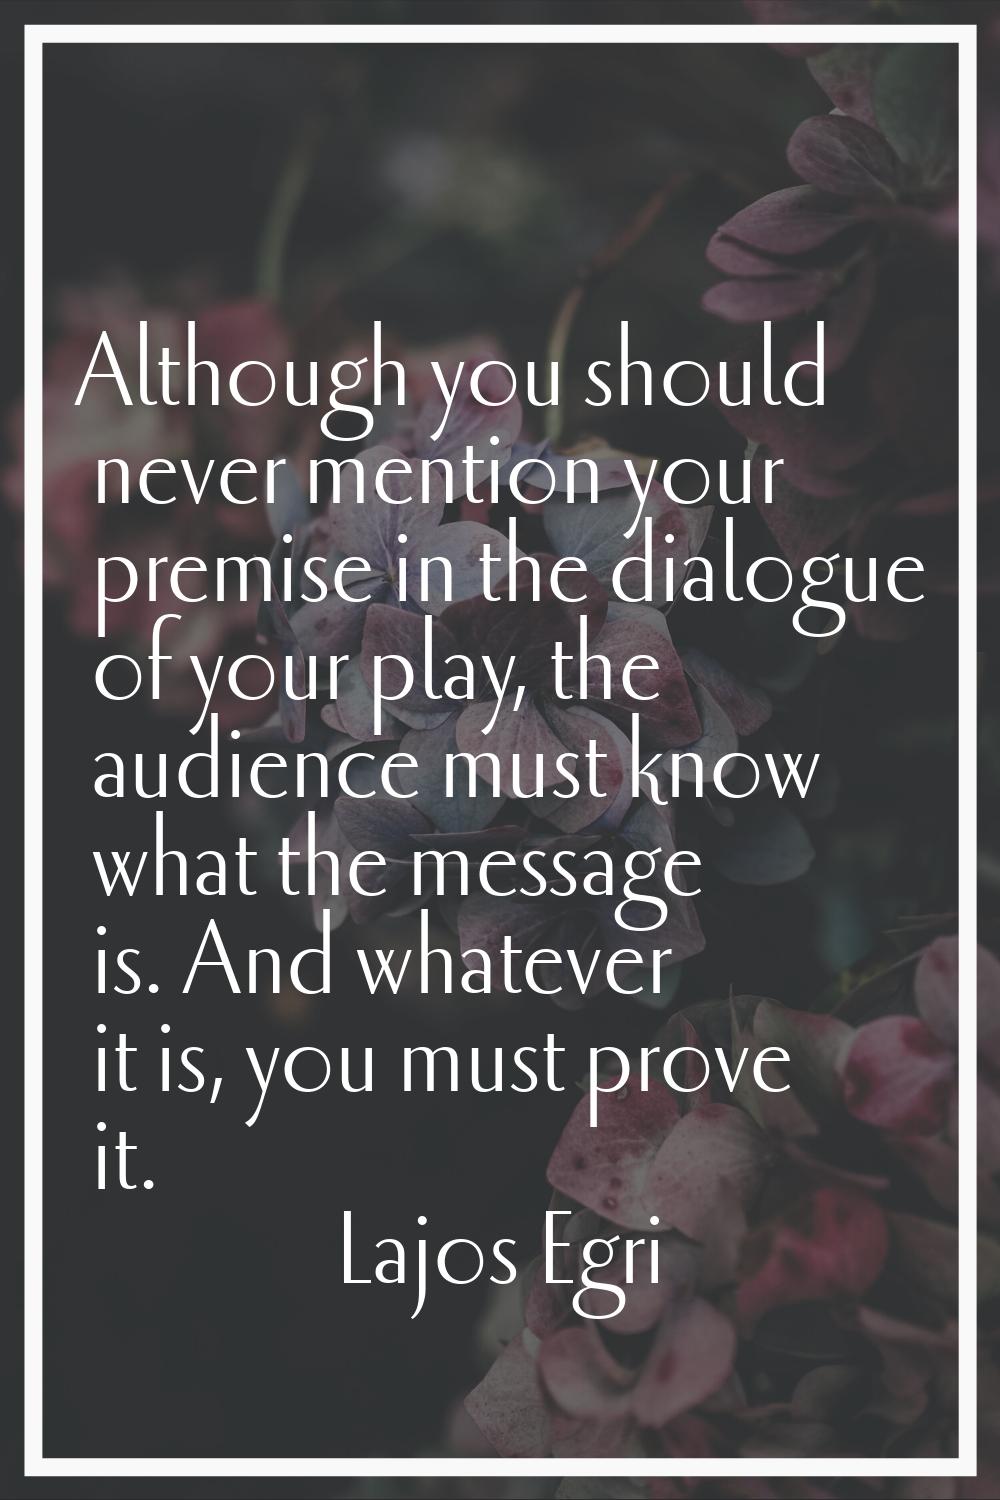 Although you should never mention your premise in the dialogue of your play, the audience must know